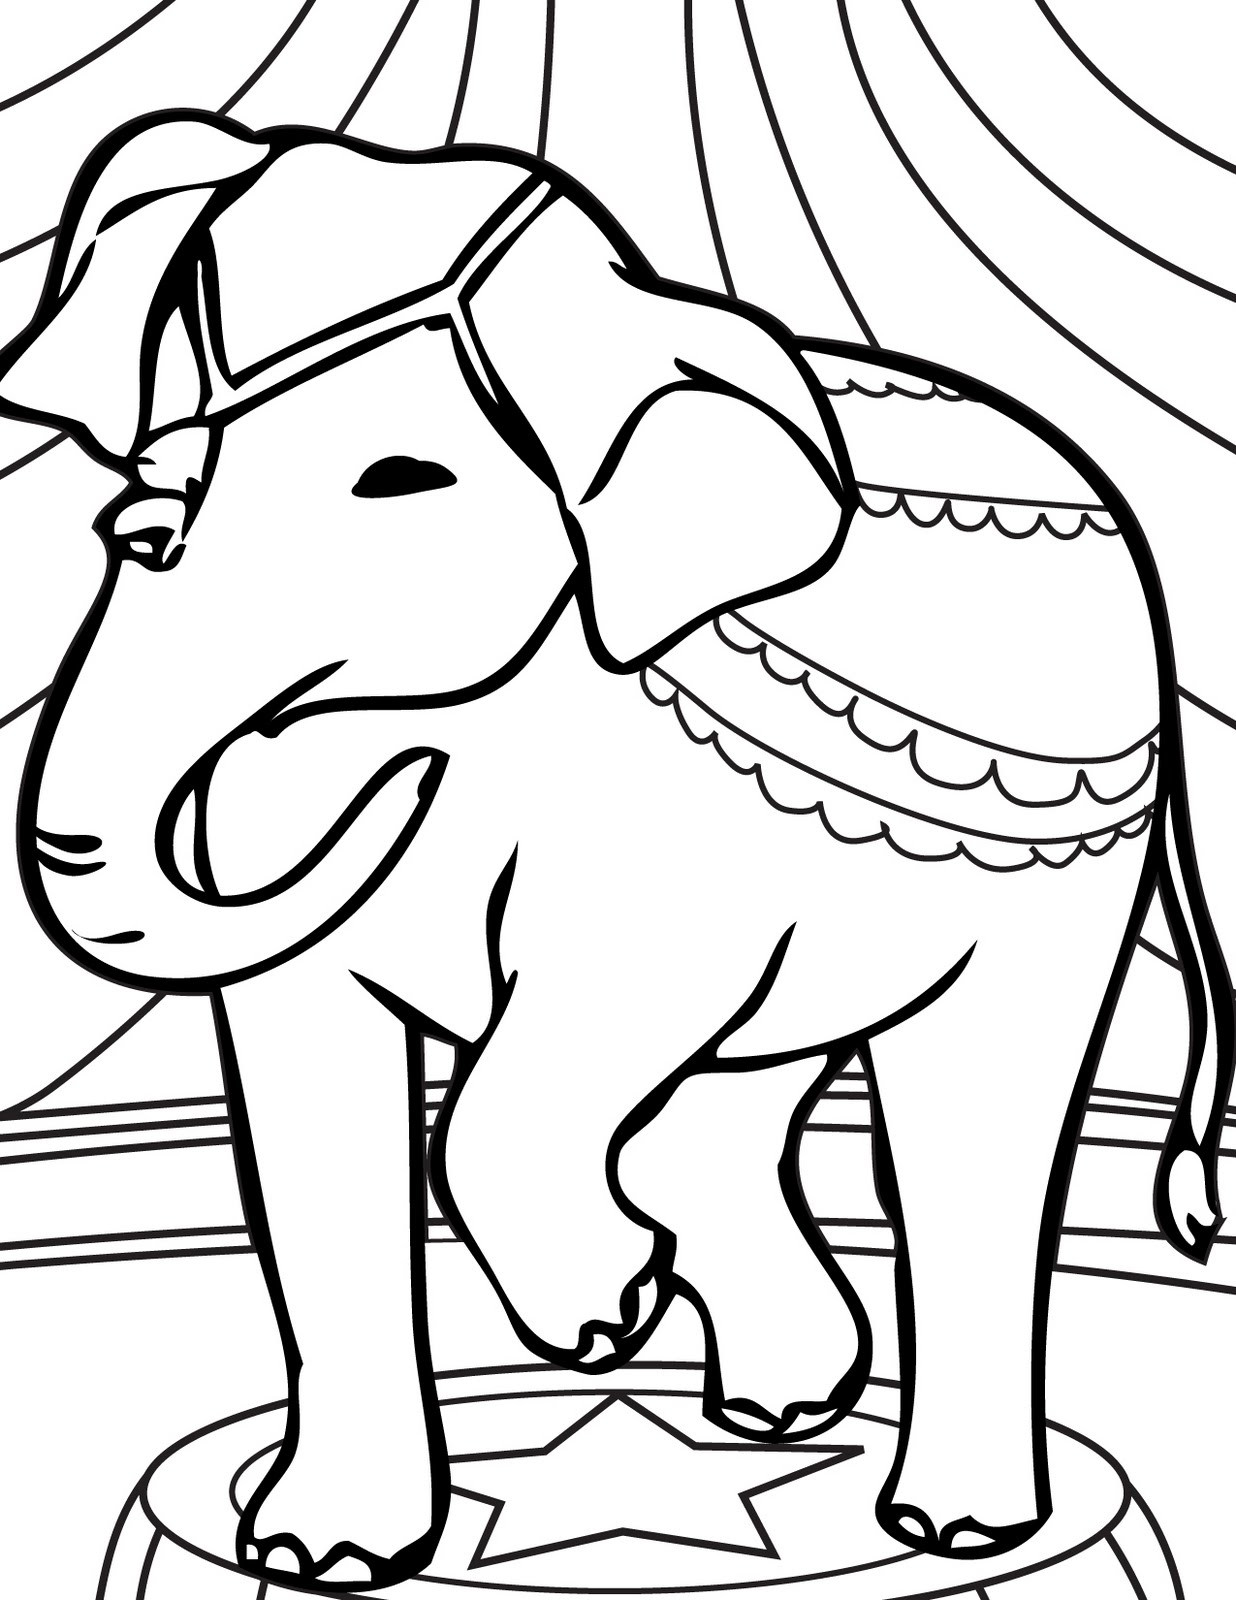 Coloring Paper For Kids
 transmissionpress Circus Elephant Coloring Pages